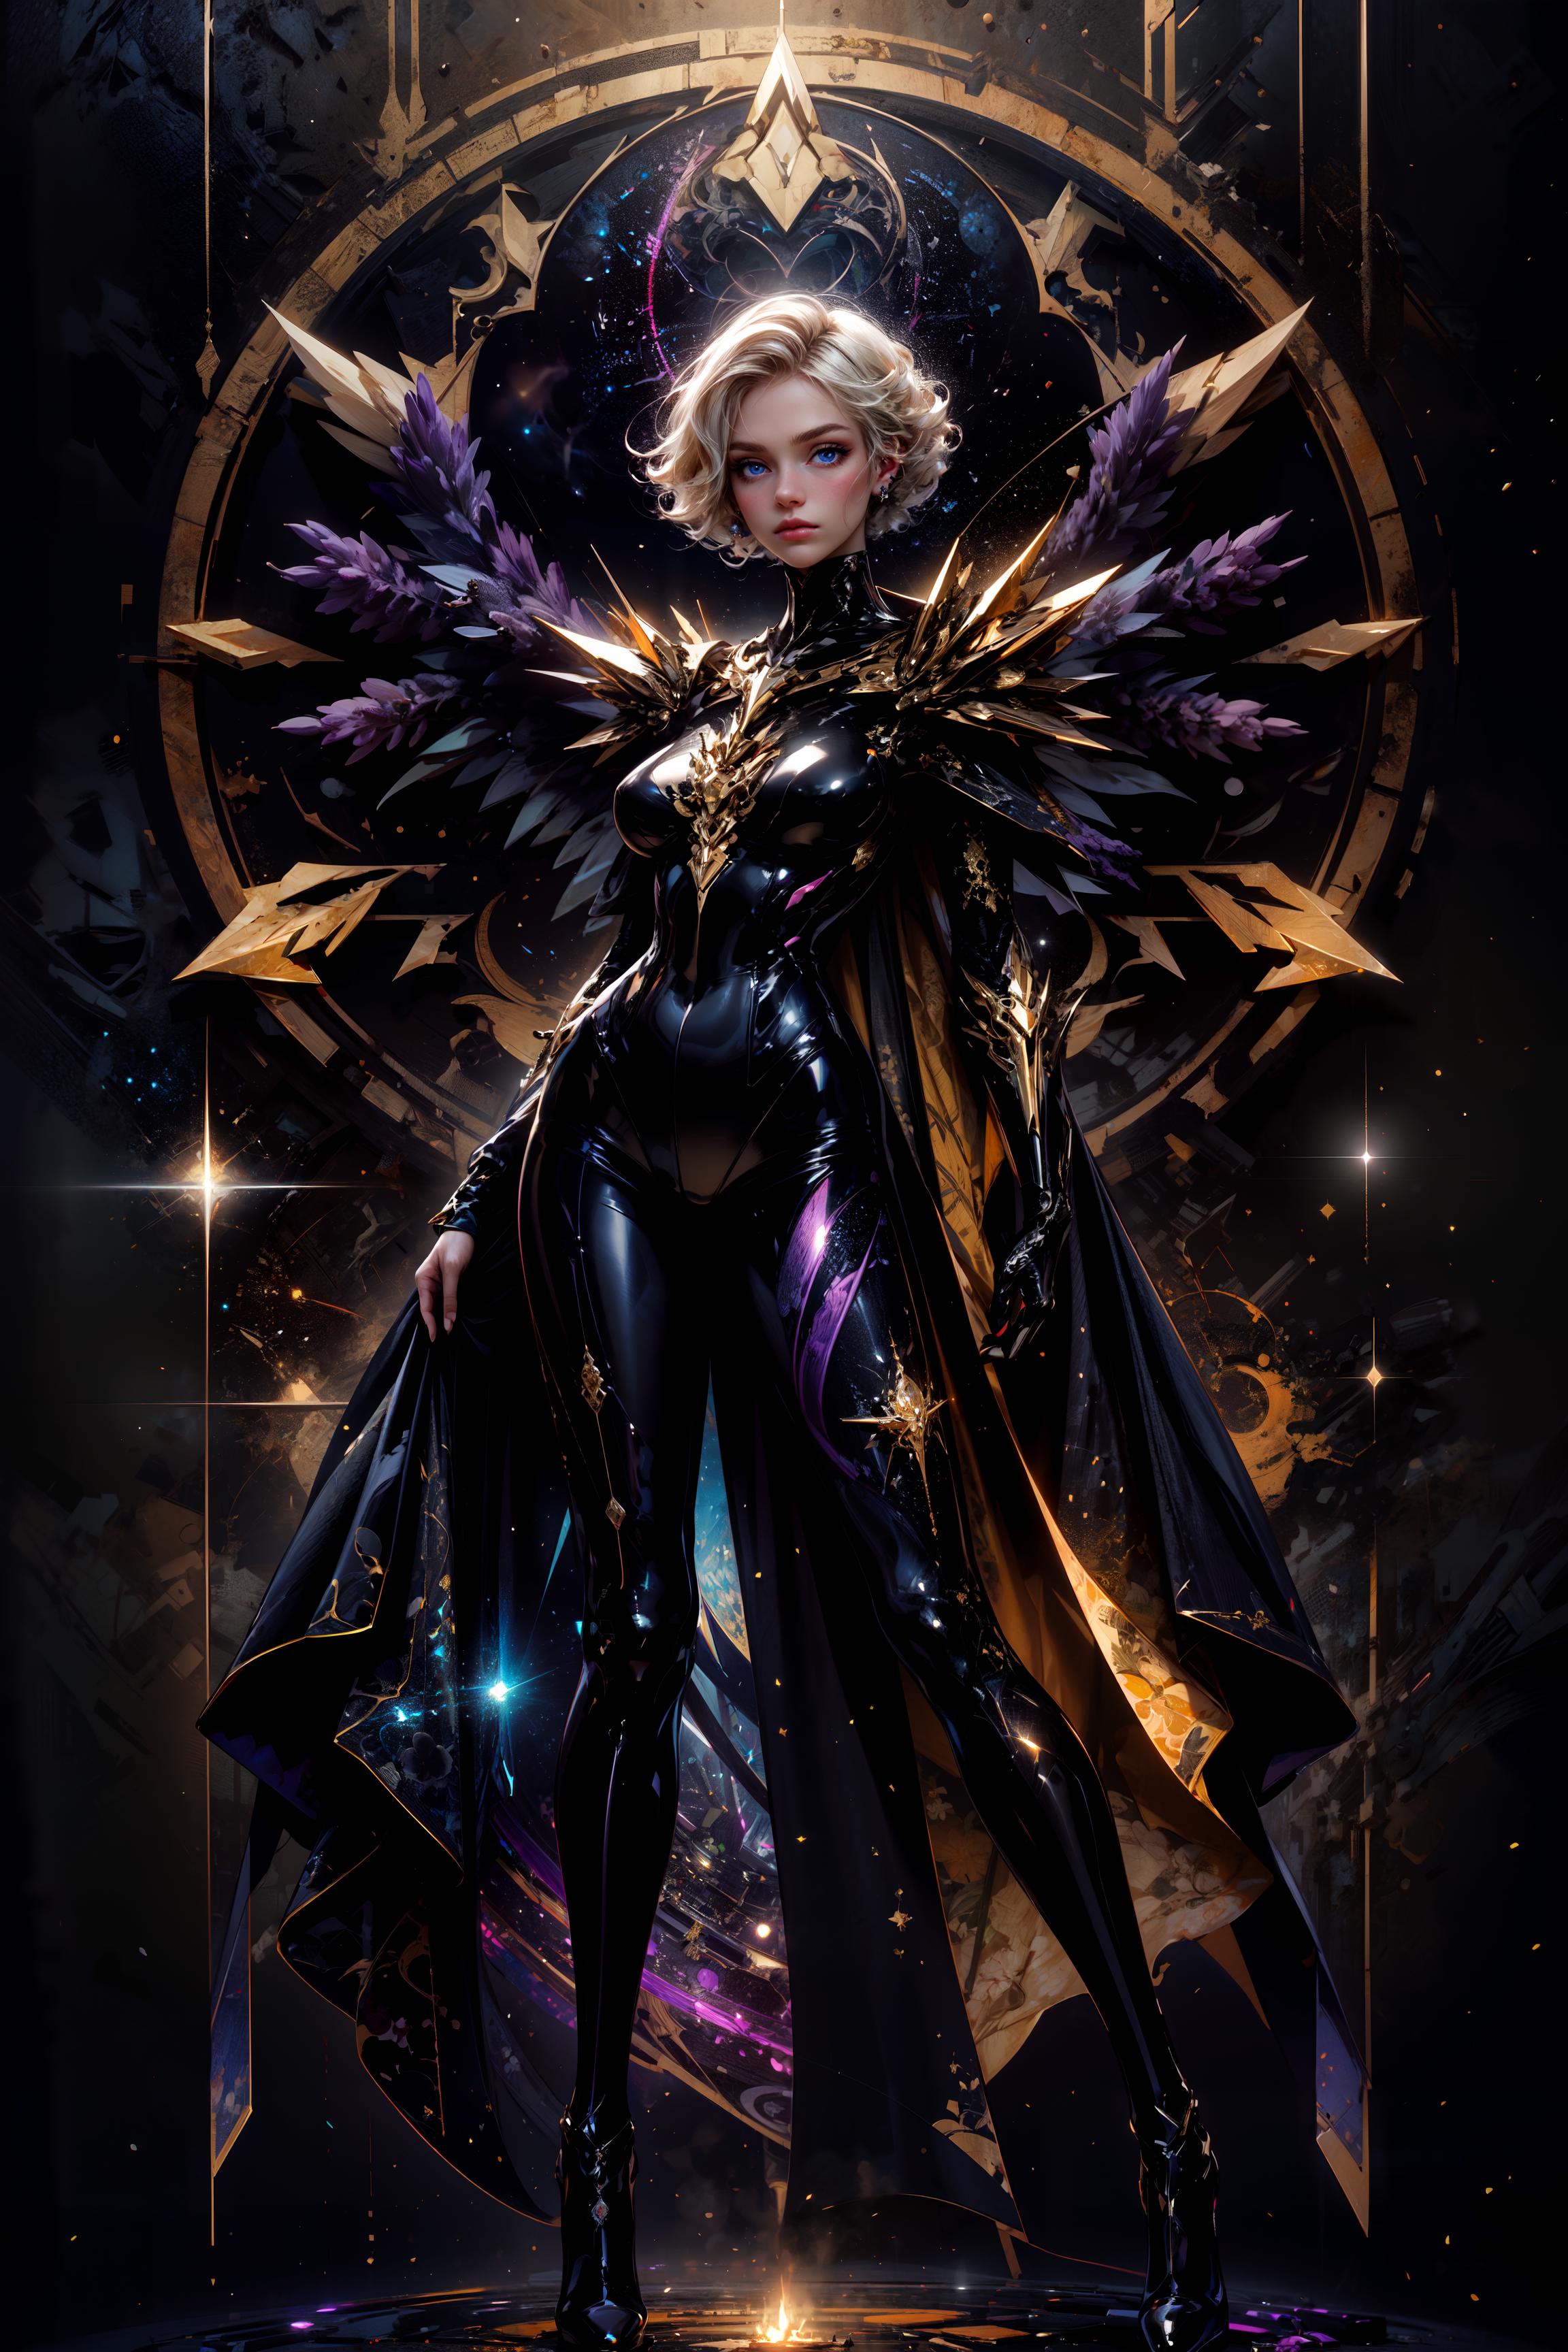 A digital artwork of a woman dressed in a black and gold costume with purple accents and wings, standing in front of a circle.